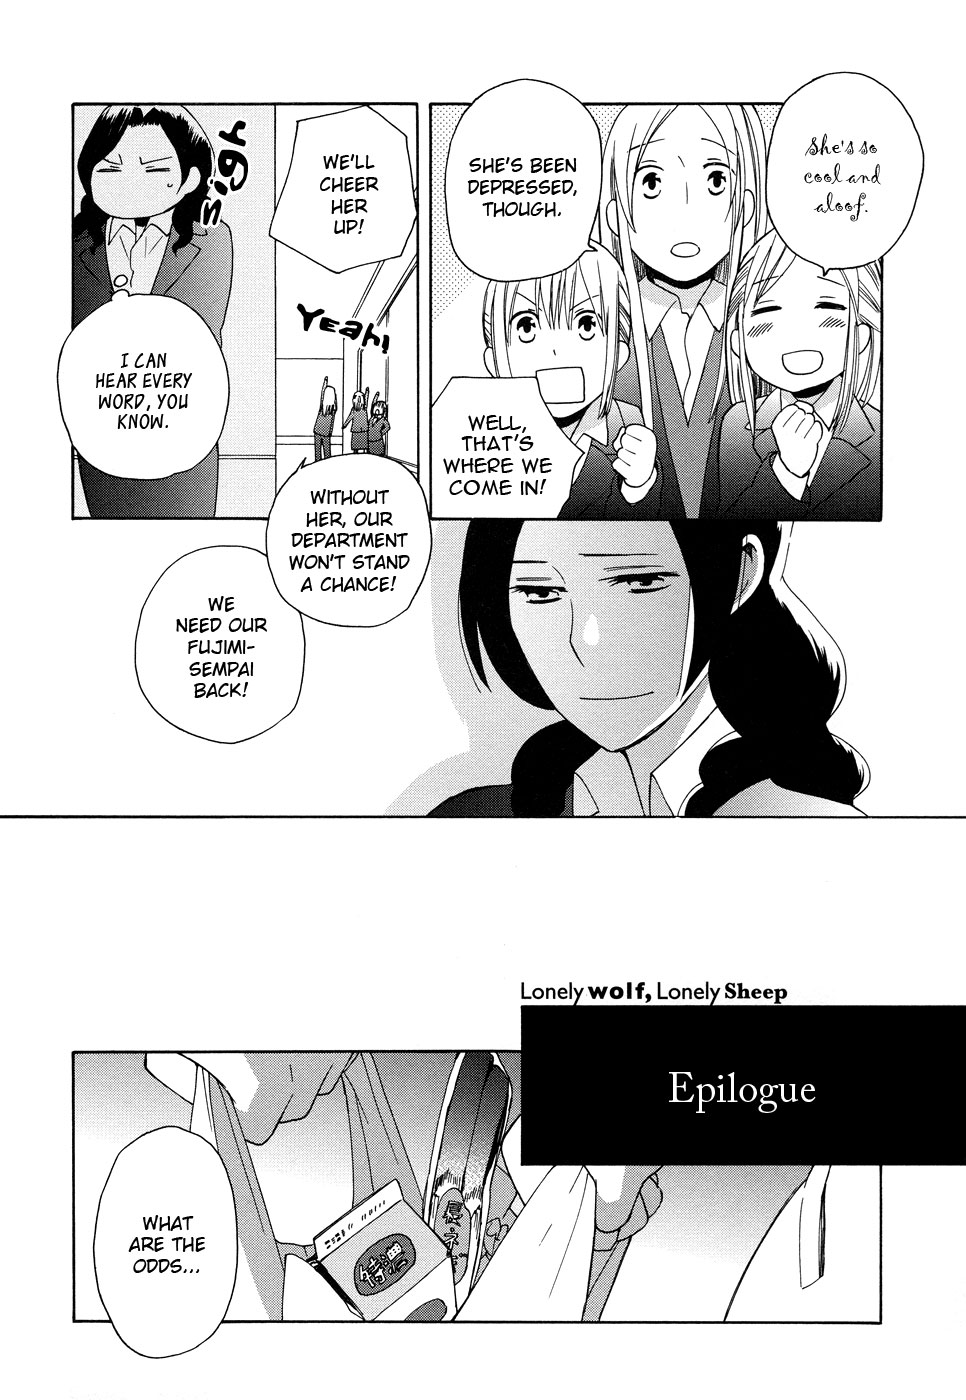 Lonely Wolf Lonely Sheep Vol. 1 Ch. 4.5 Extras